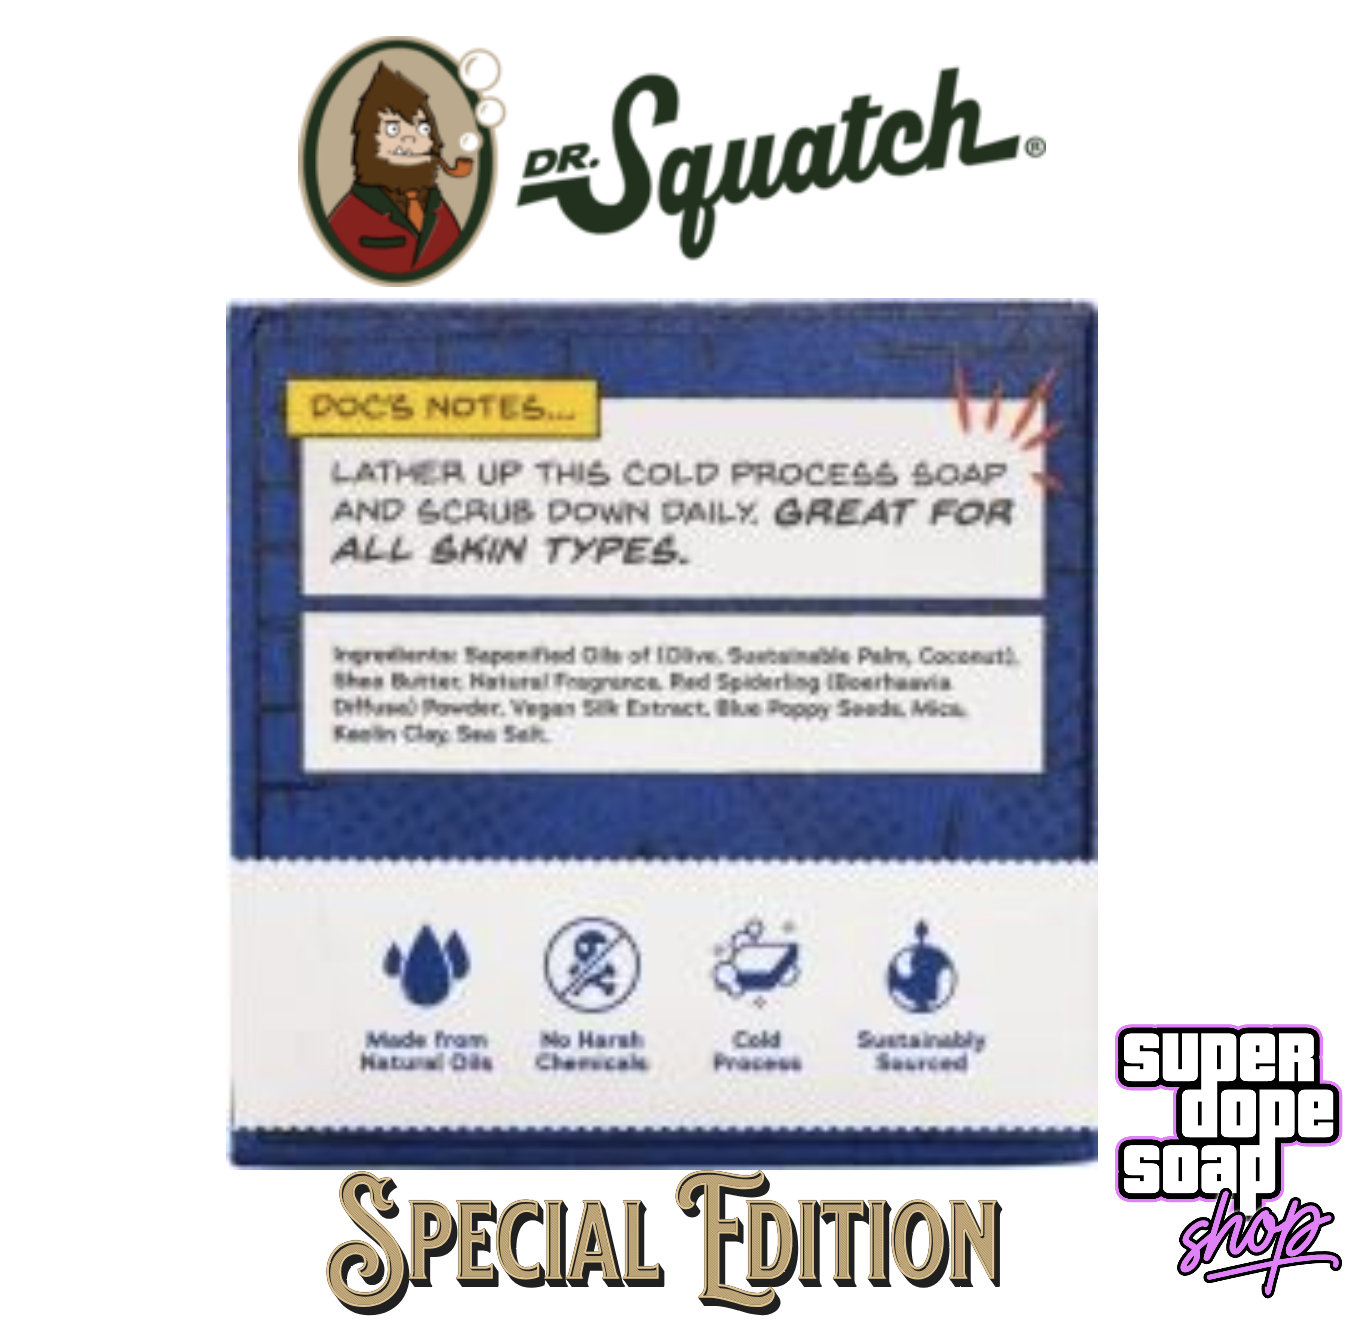 New Dr. Squatch SPIDER-MAN Spidey Suds Special Edition Bar With